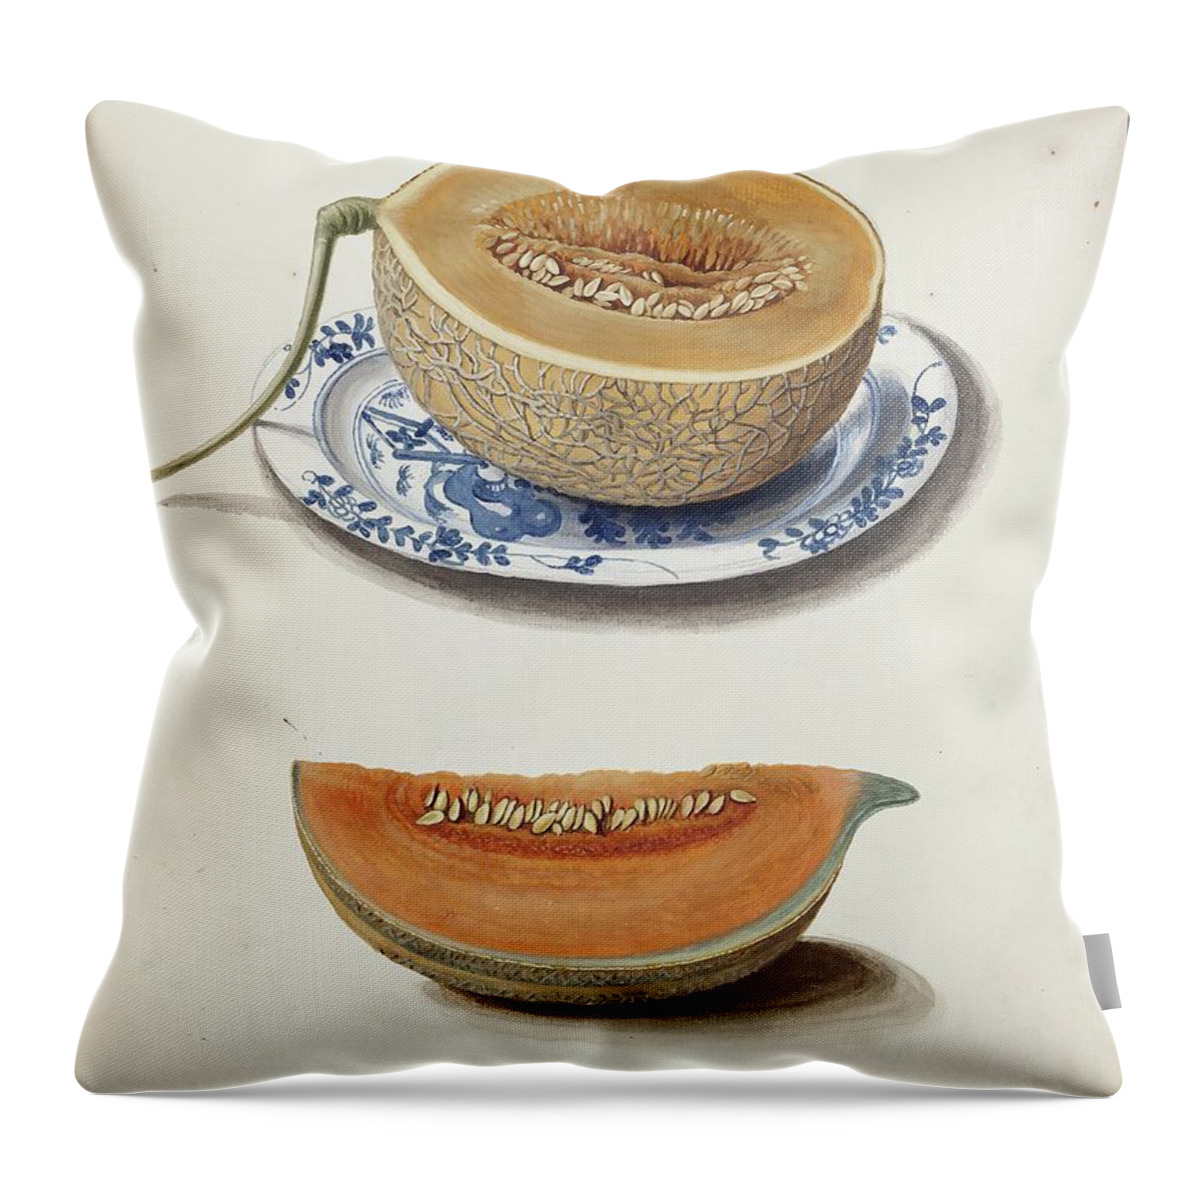 Melon Throw Pillow featuring the painting Studie Af To Netmeloner, Halveret Og Kvadreret by Johanna Fosie